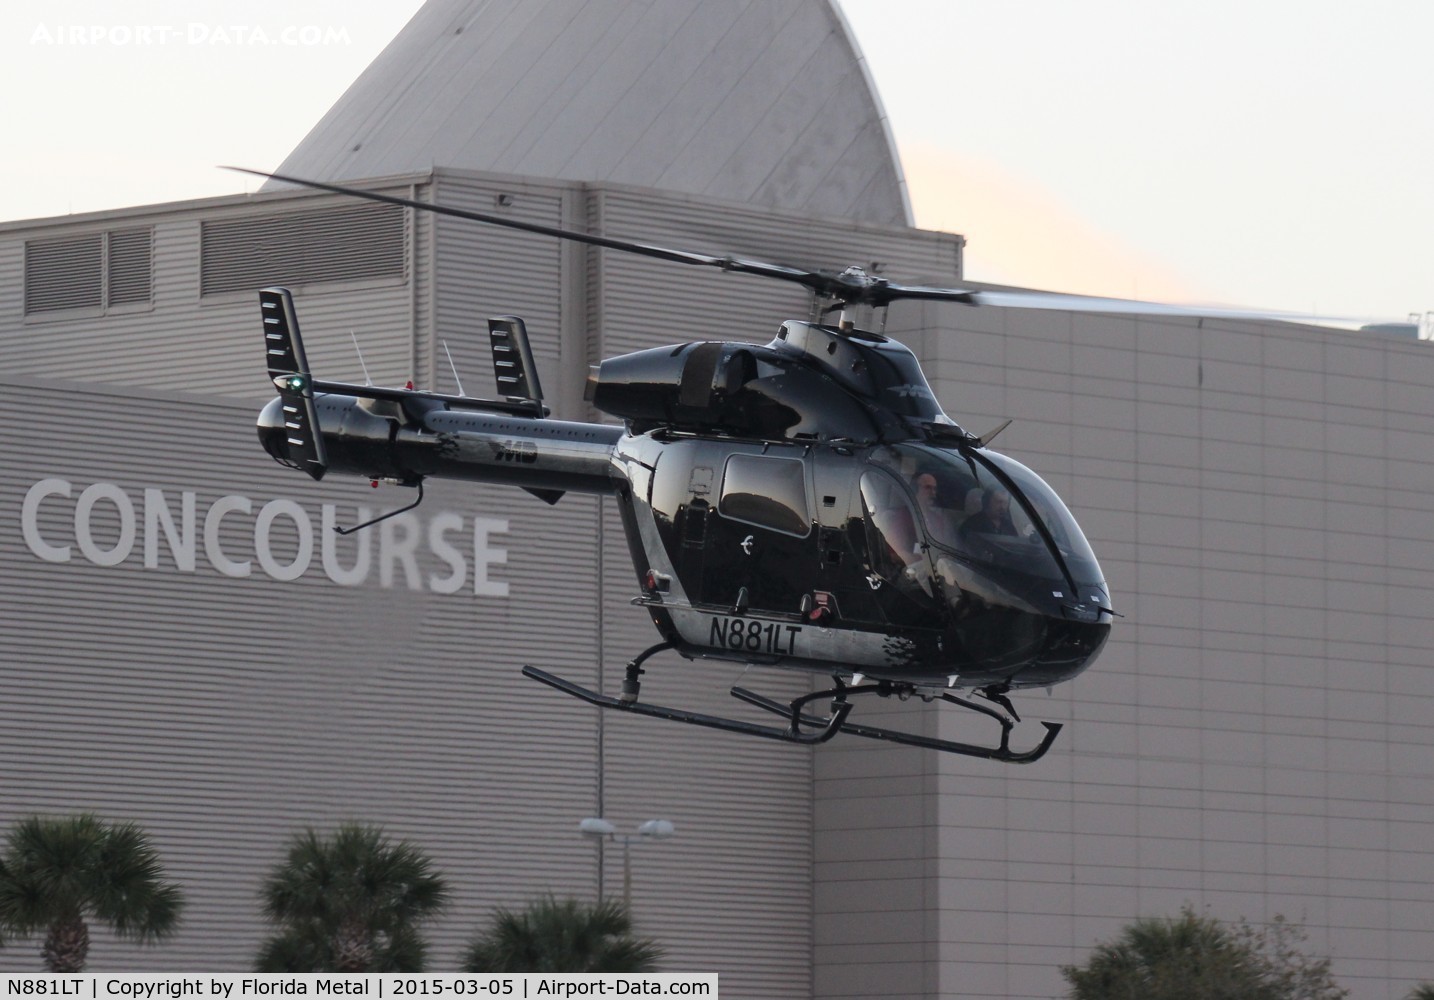 N881LT, 2006 MD Helicopters MD-900 Explorer C/N 900-00117, MD-900 at Heliexpo 2015